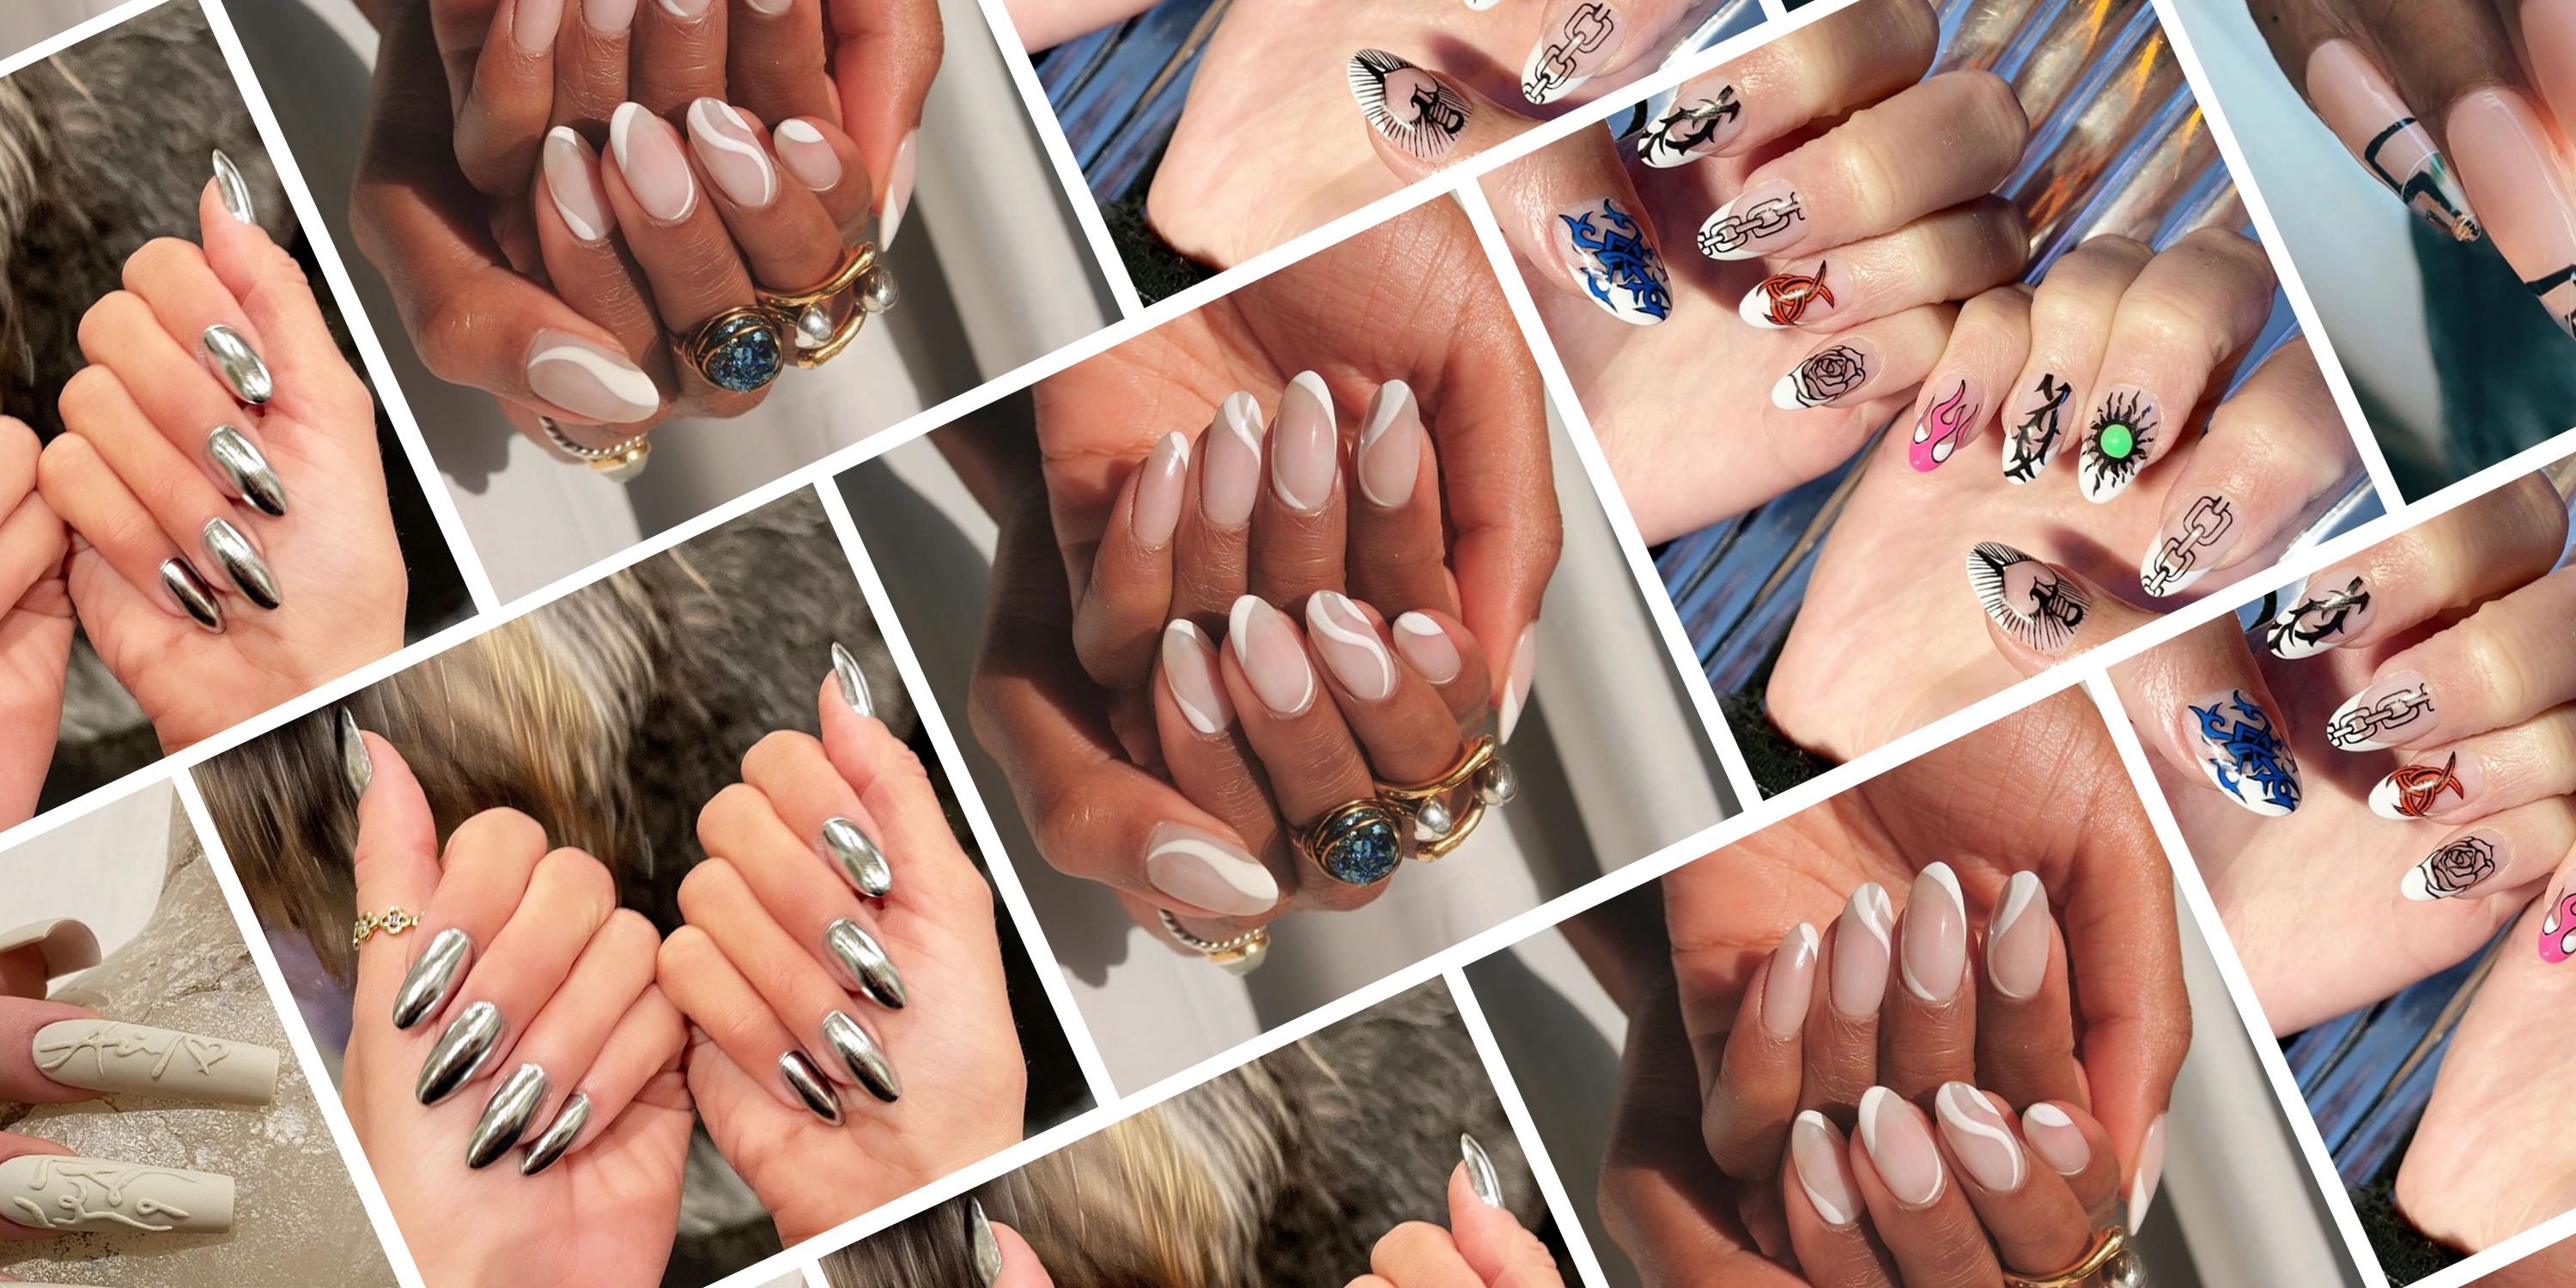 10. Nail Art Trends That Will Dominate 2021 - wide 8